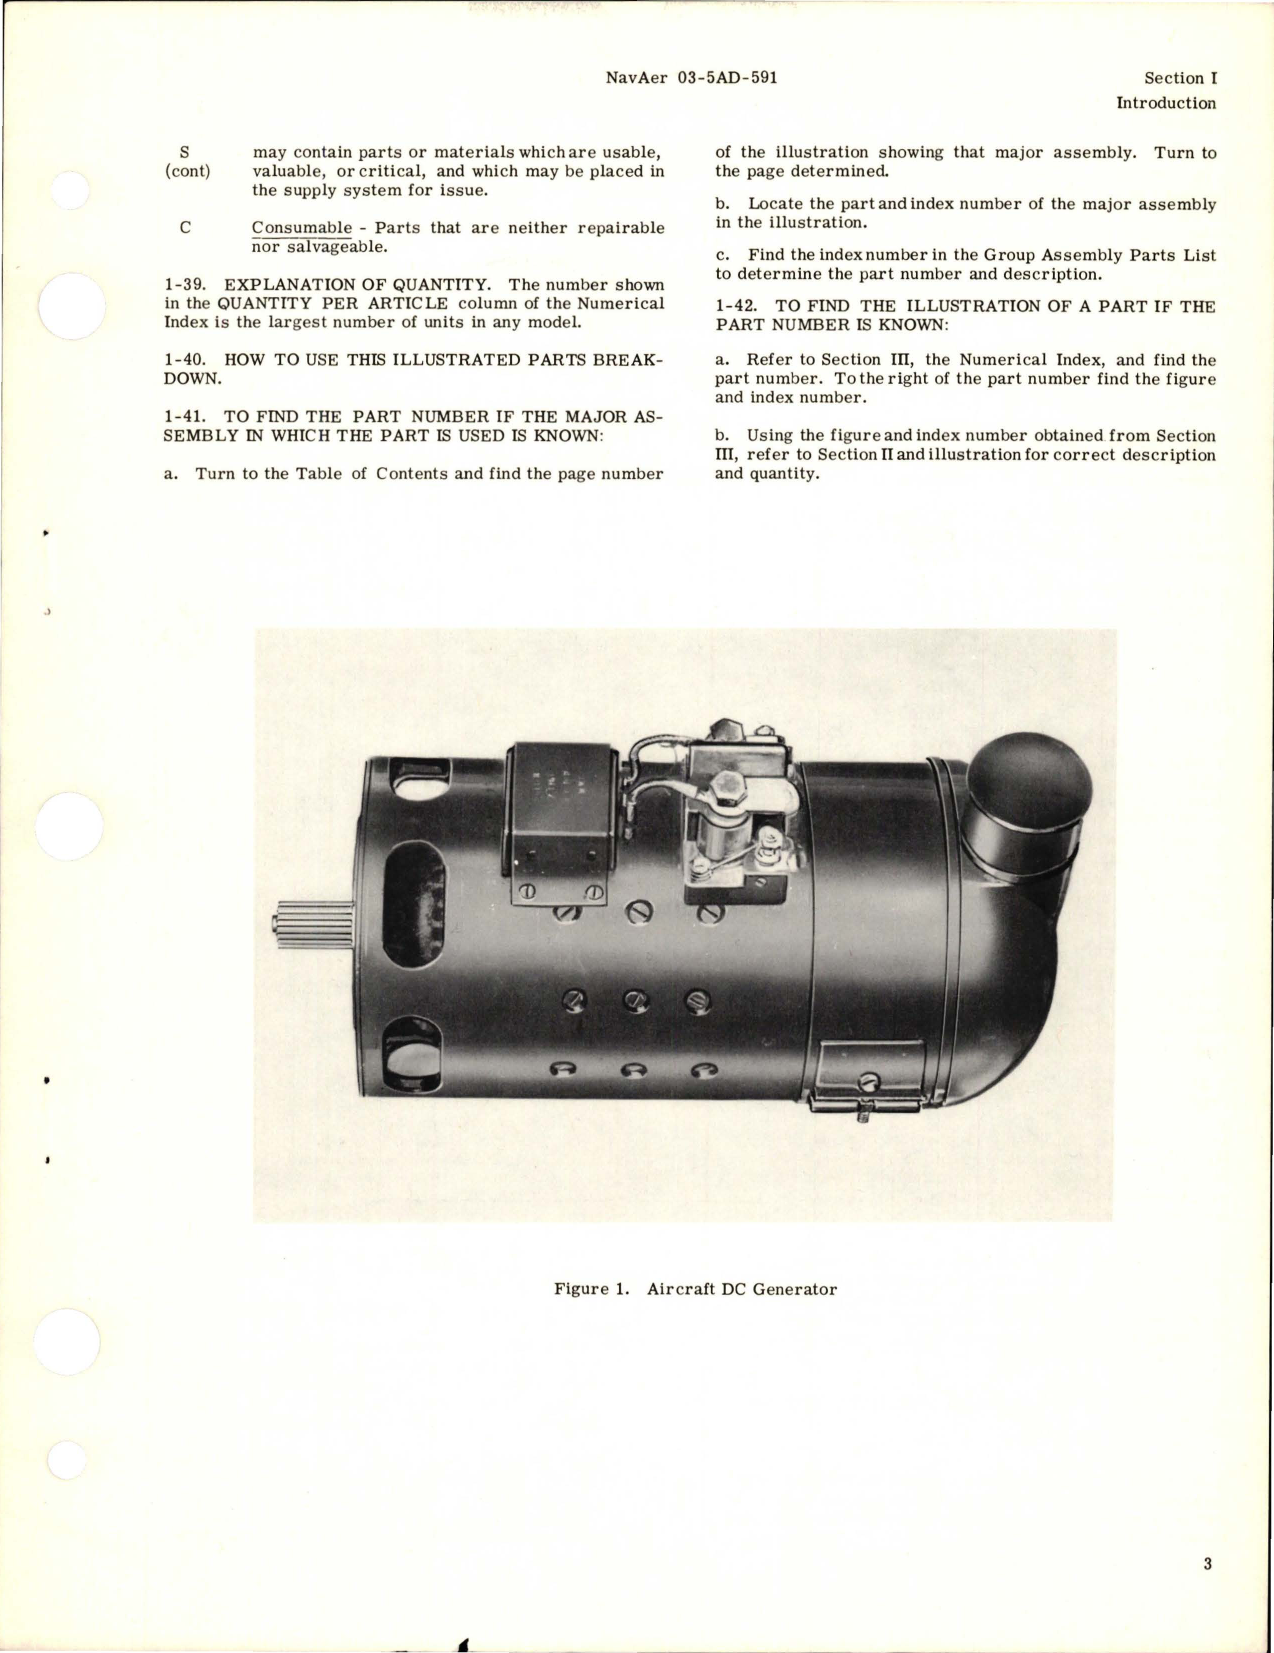 Sample page 5 from AirCorps Library document: Illustrated Parts Breakdown for DC Generators - Models 2CM70C5 and 2CM70D2